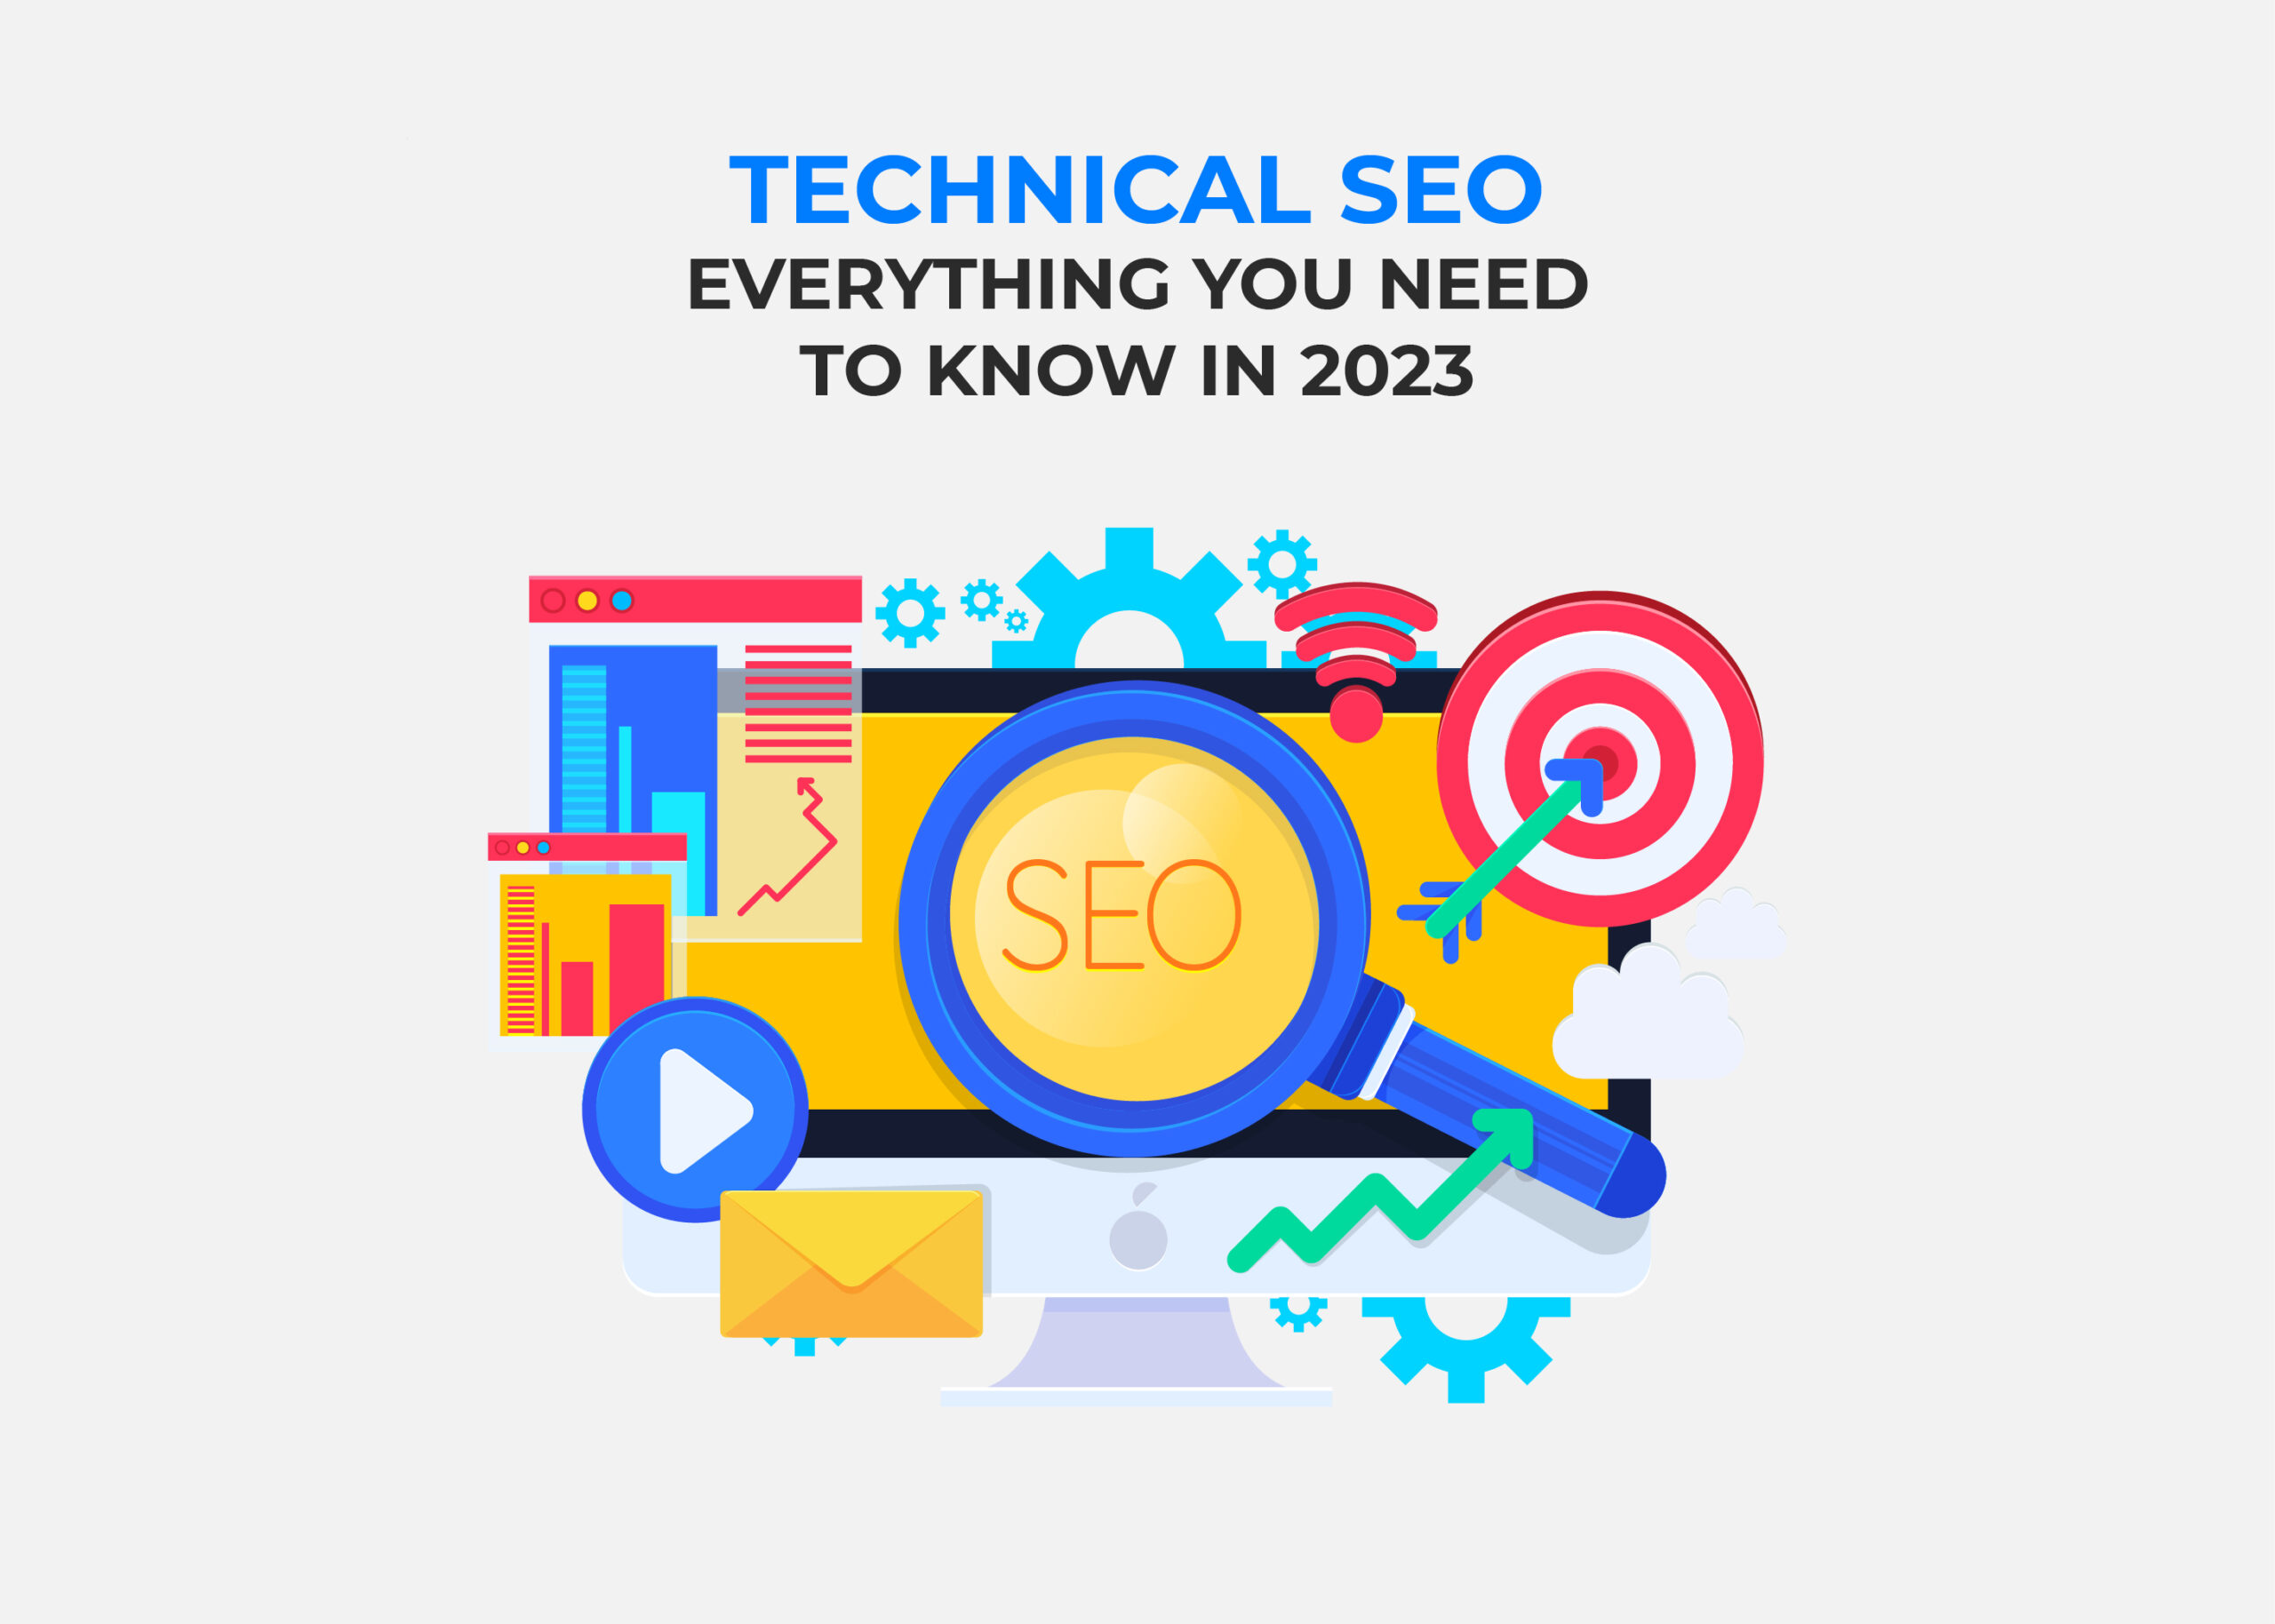 The screen displays a comprehensive description of technical SEO and essential elements relevant in today's digital landscape